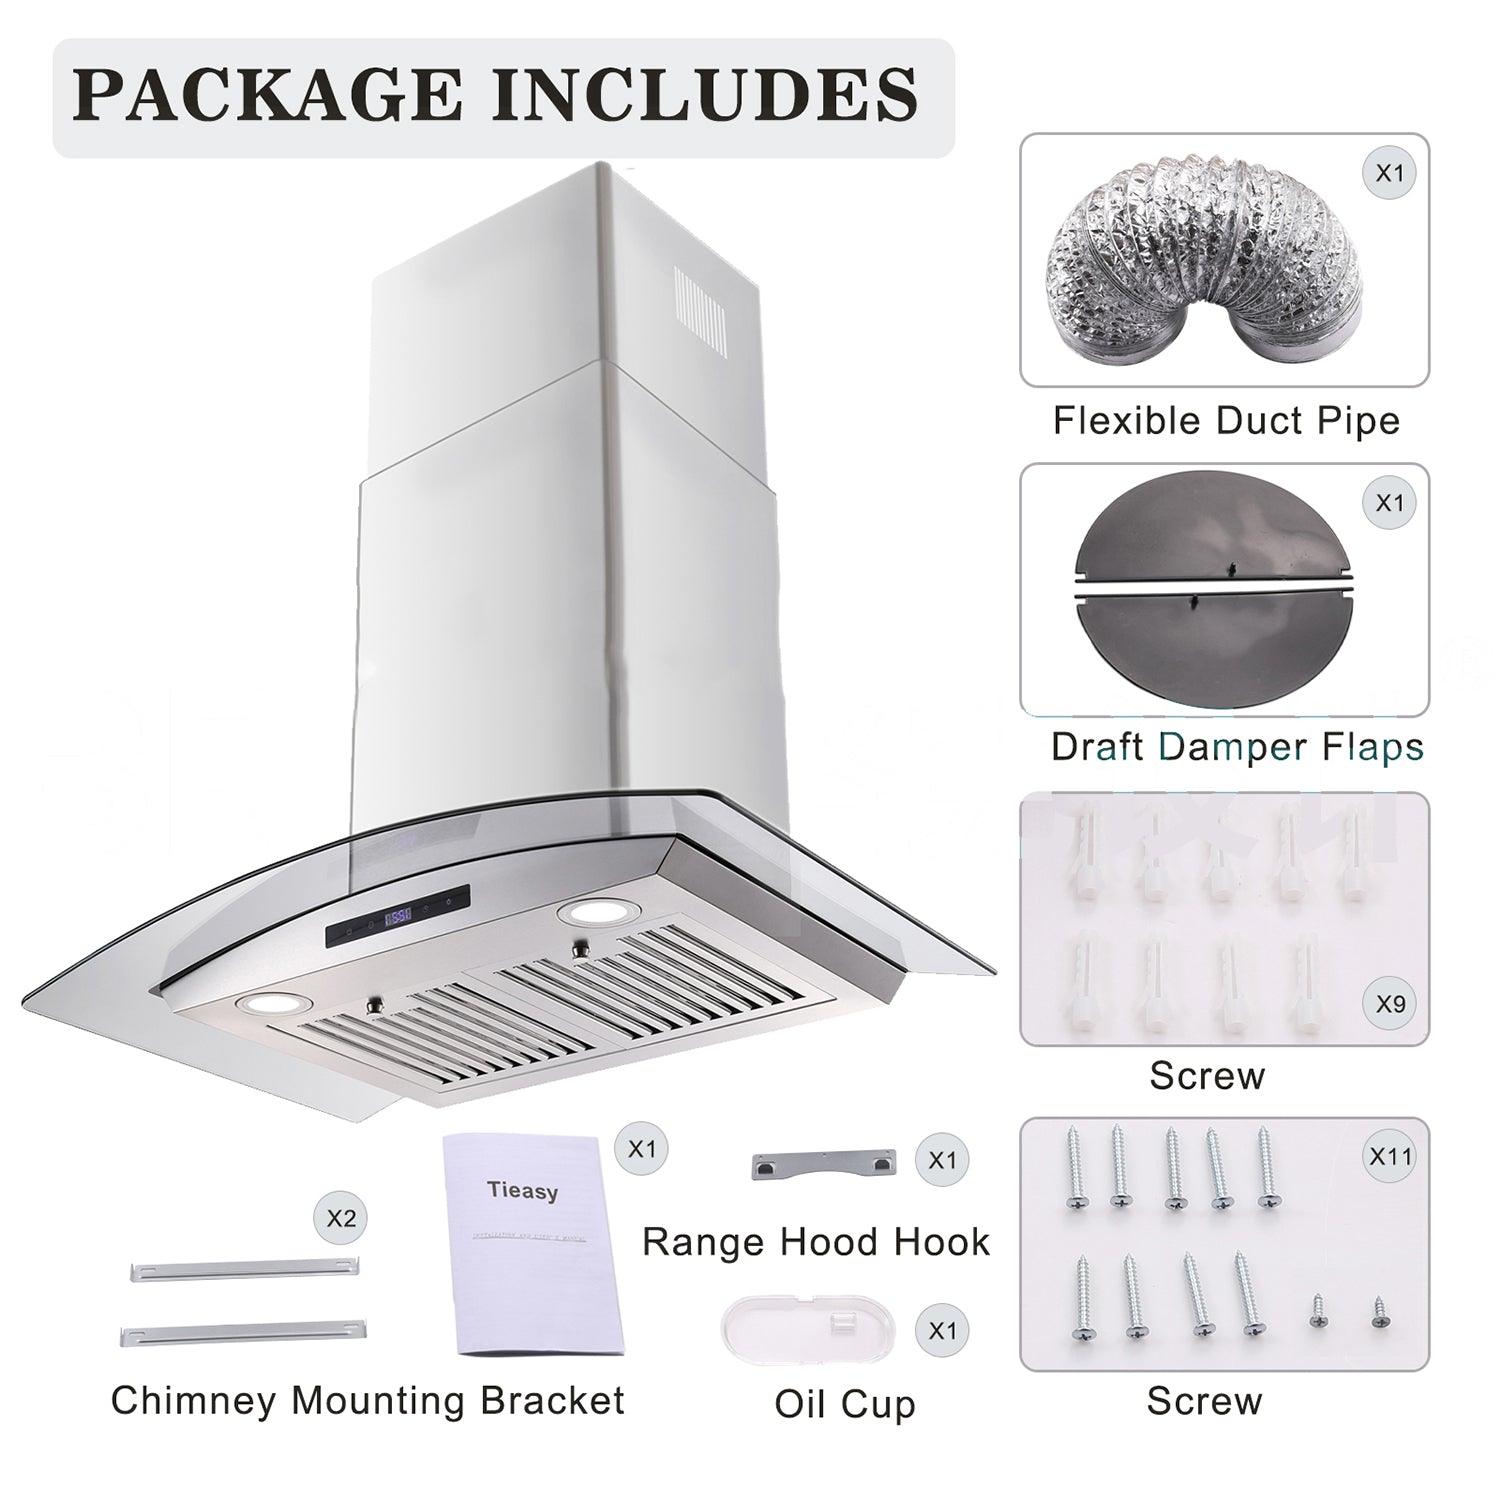 Tieasy 30 inch Wall Mount Range Hood 700 CFM Vent Hood Touch Control Stainless Steel Filters